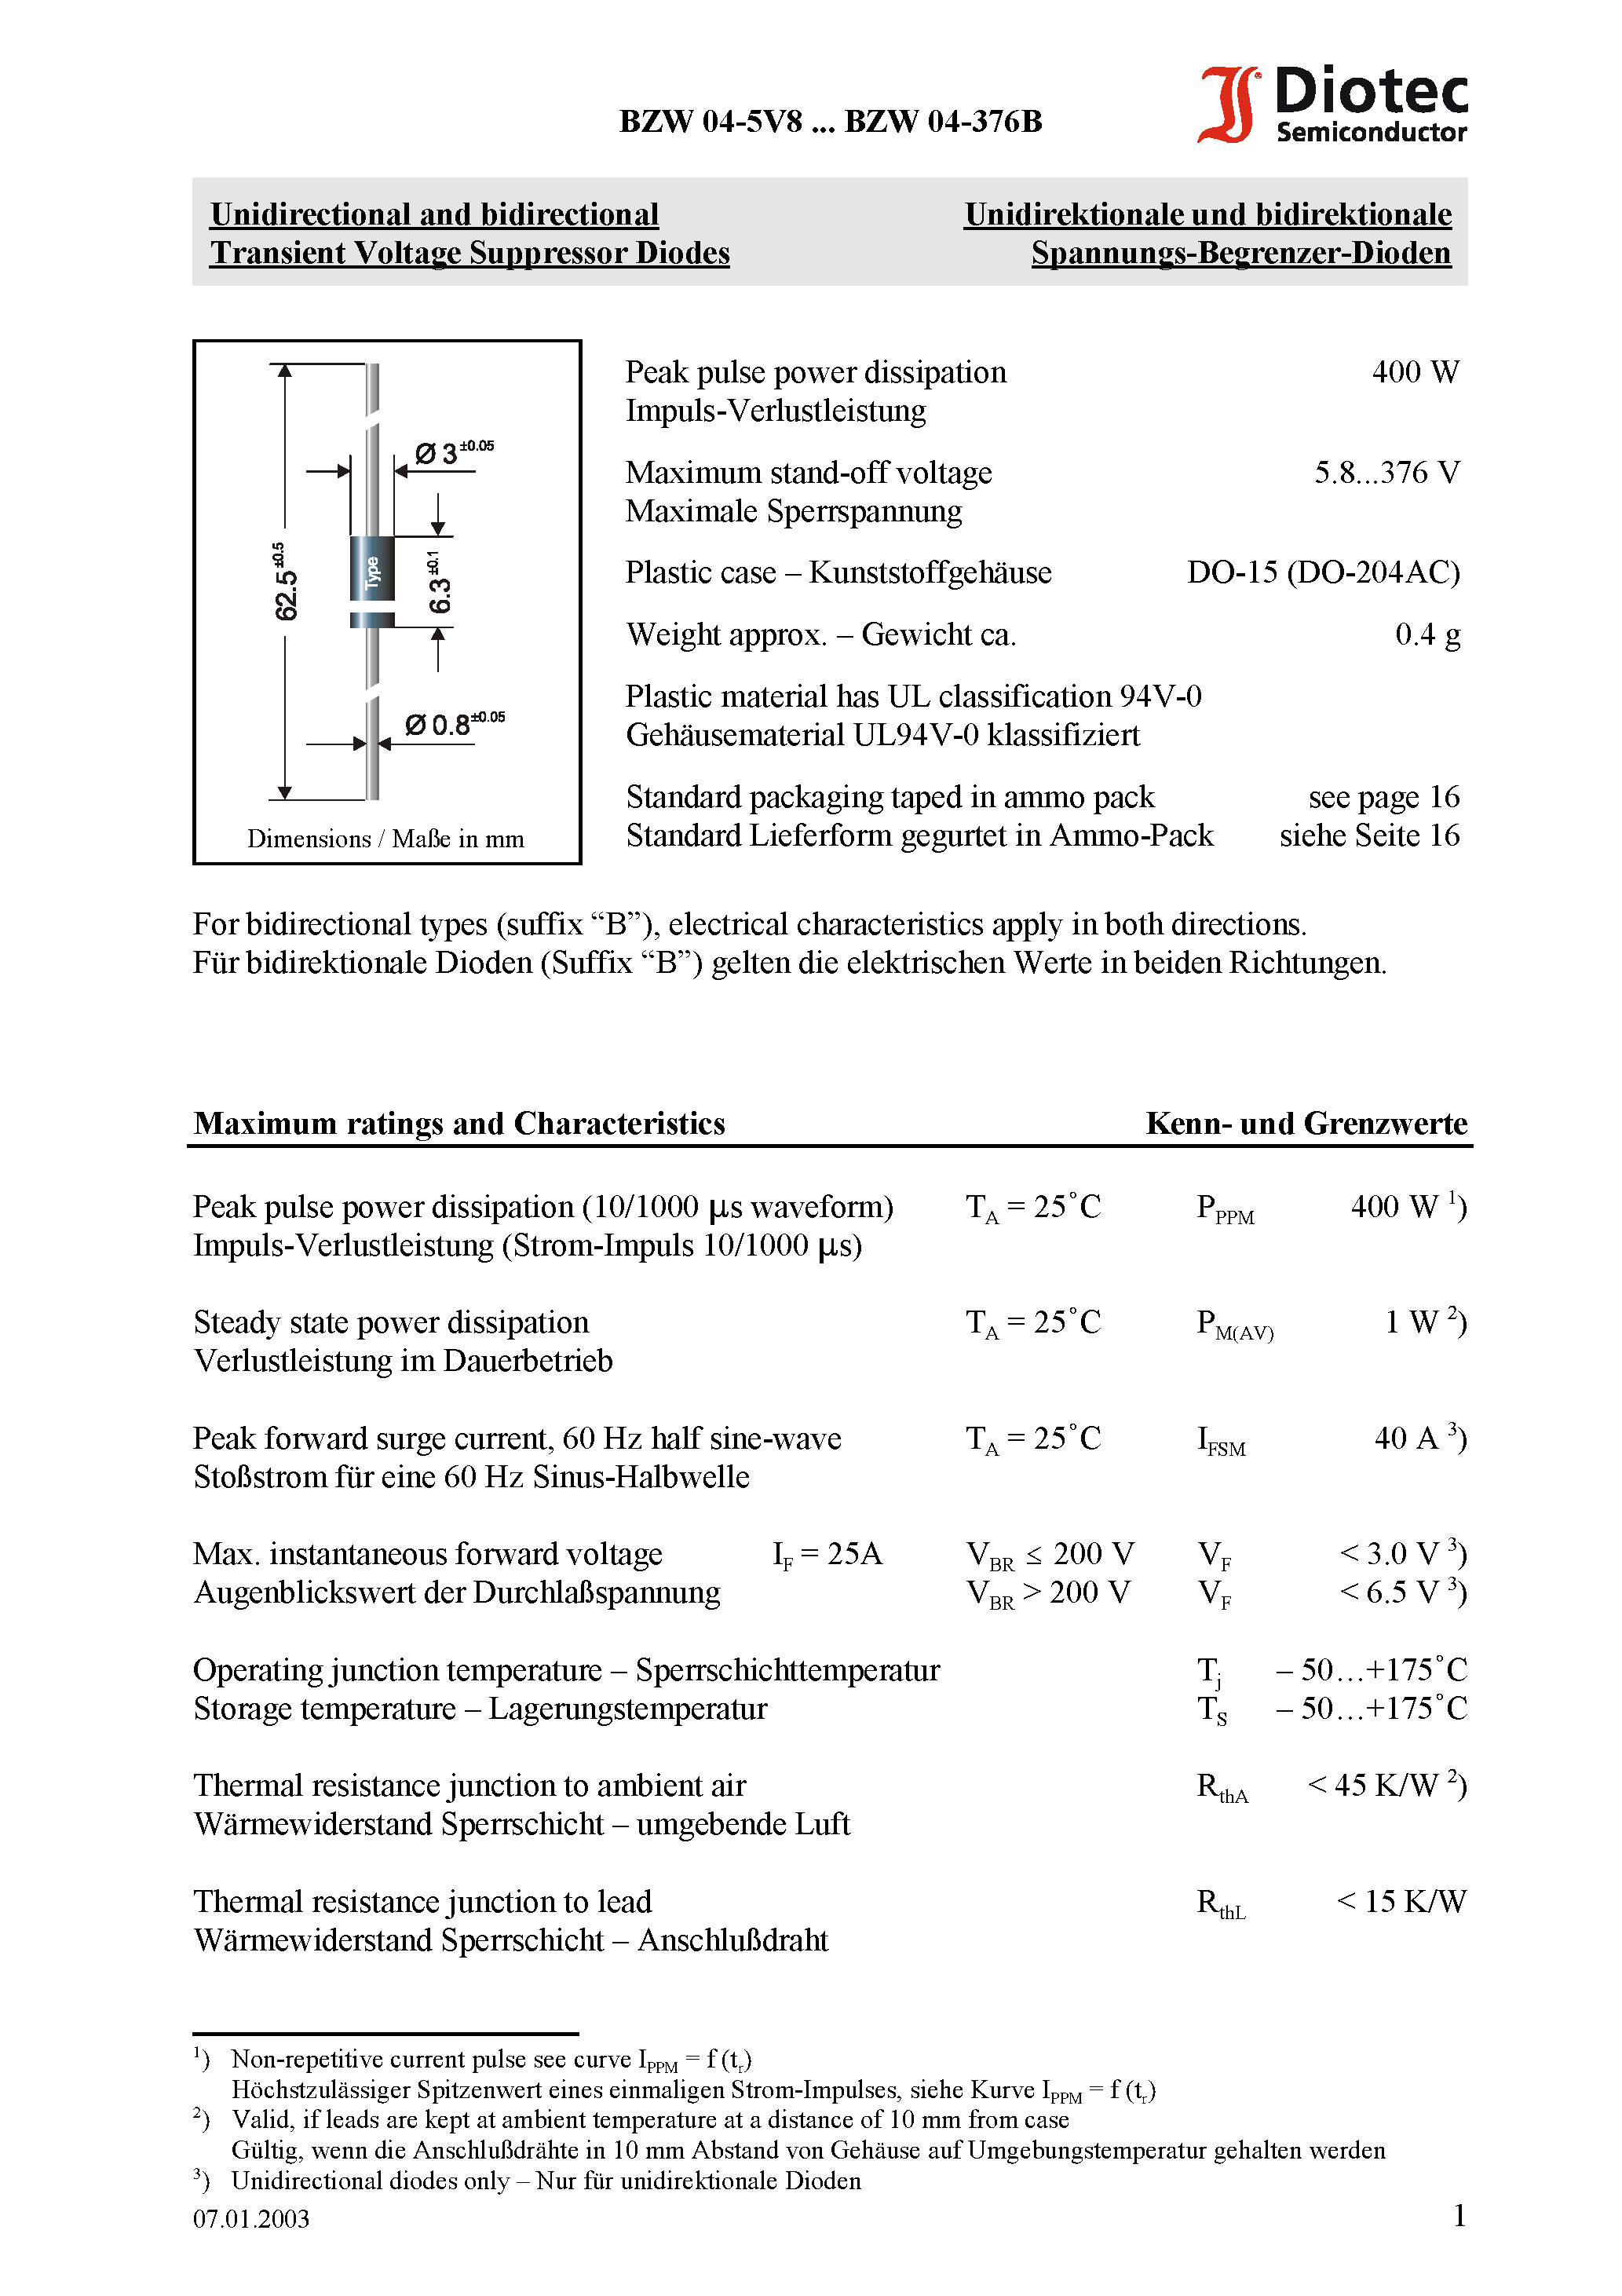 Datasheet BZW04-14 - Unidirectional and bidirectional Transient Voltage Suppressor Diodes page 1